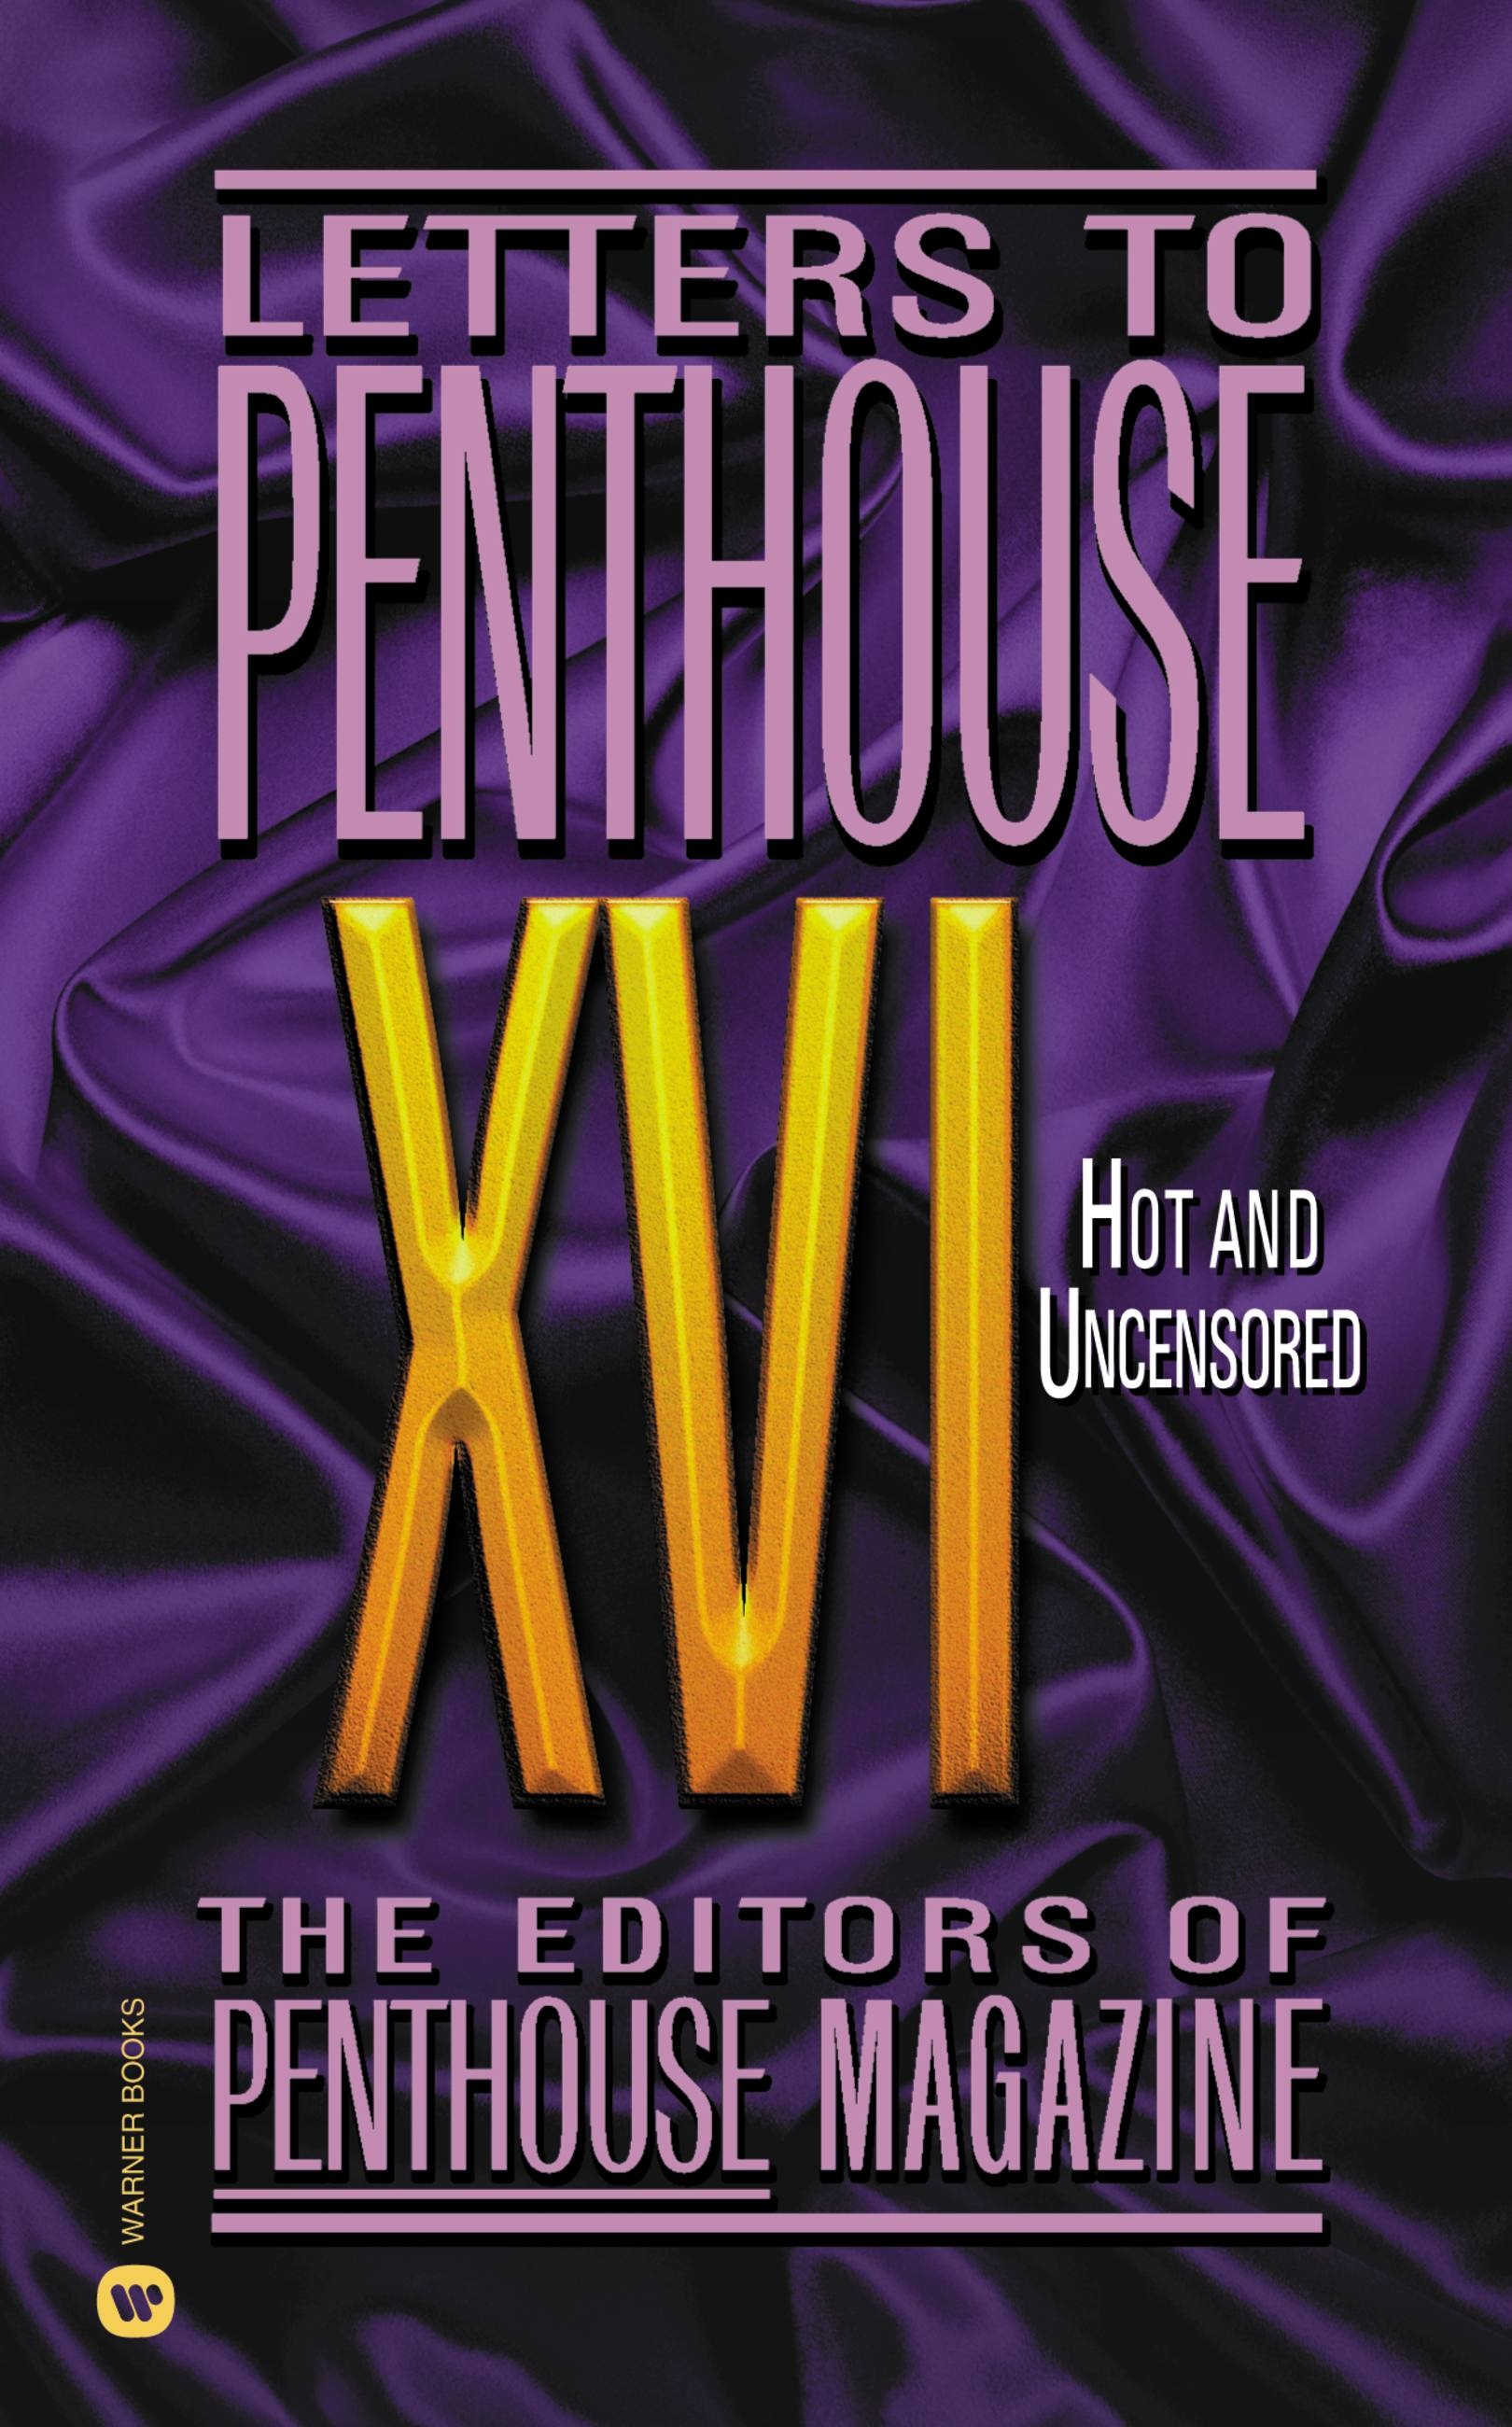 Letters To Penthouse Xvi By Penthouse International Hachette Book Group